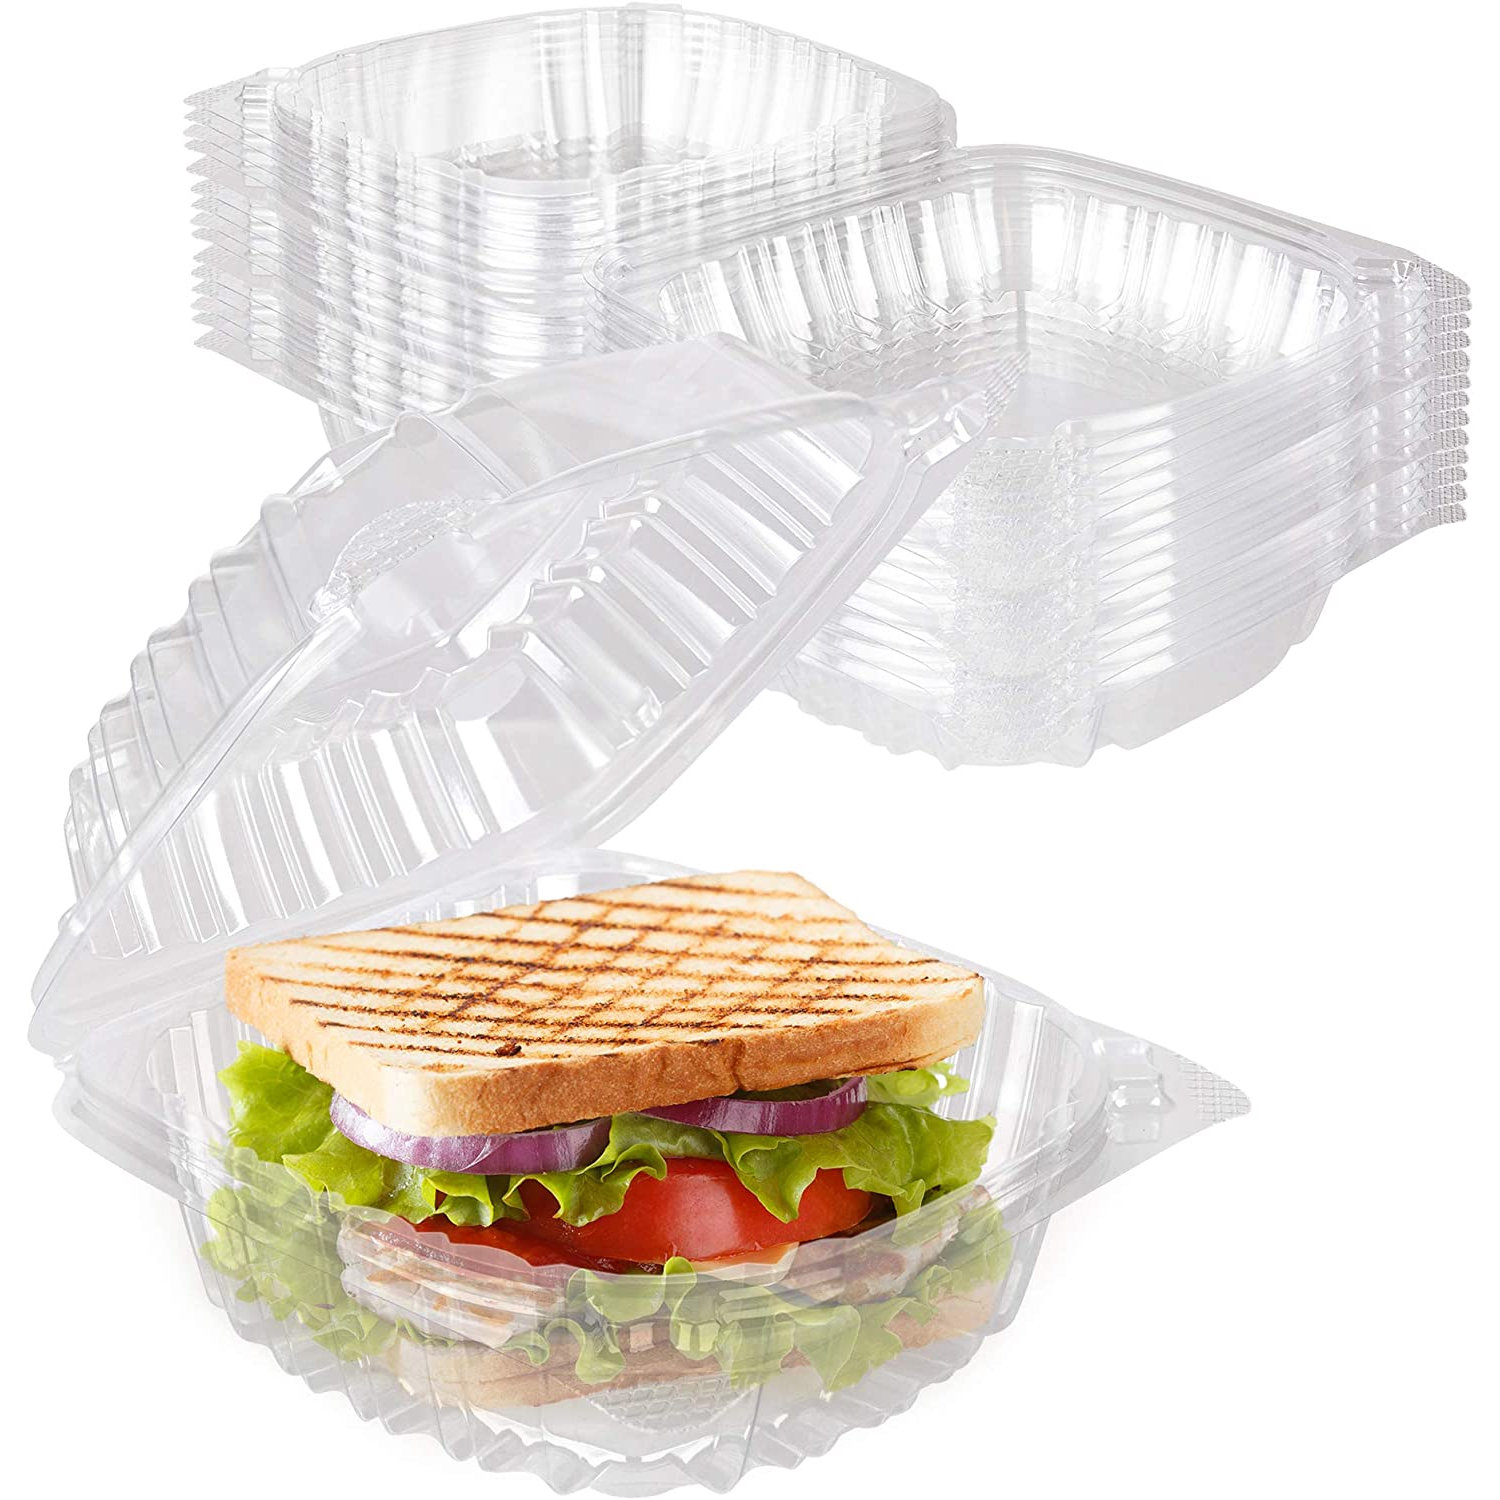 Lapods 101050 Hinged-Lid 6 Strip Connected Plastic Containers